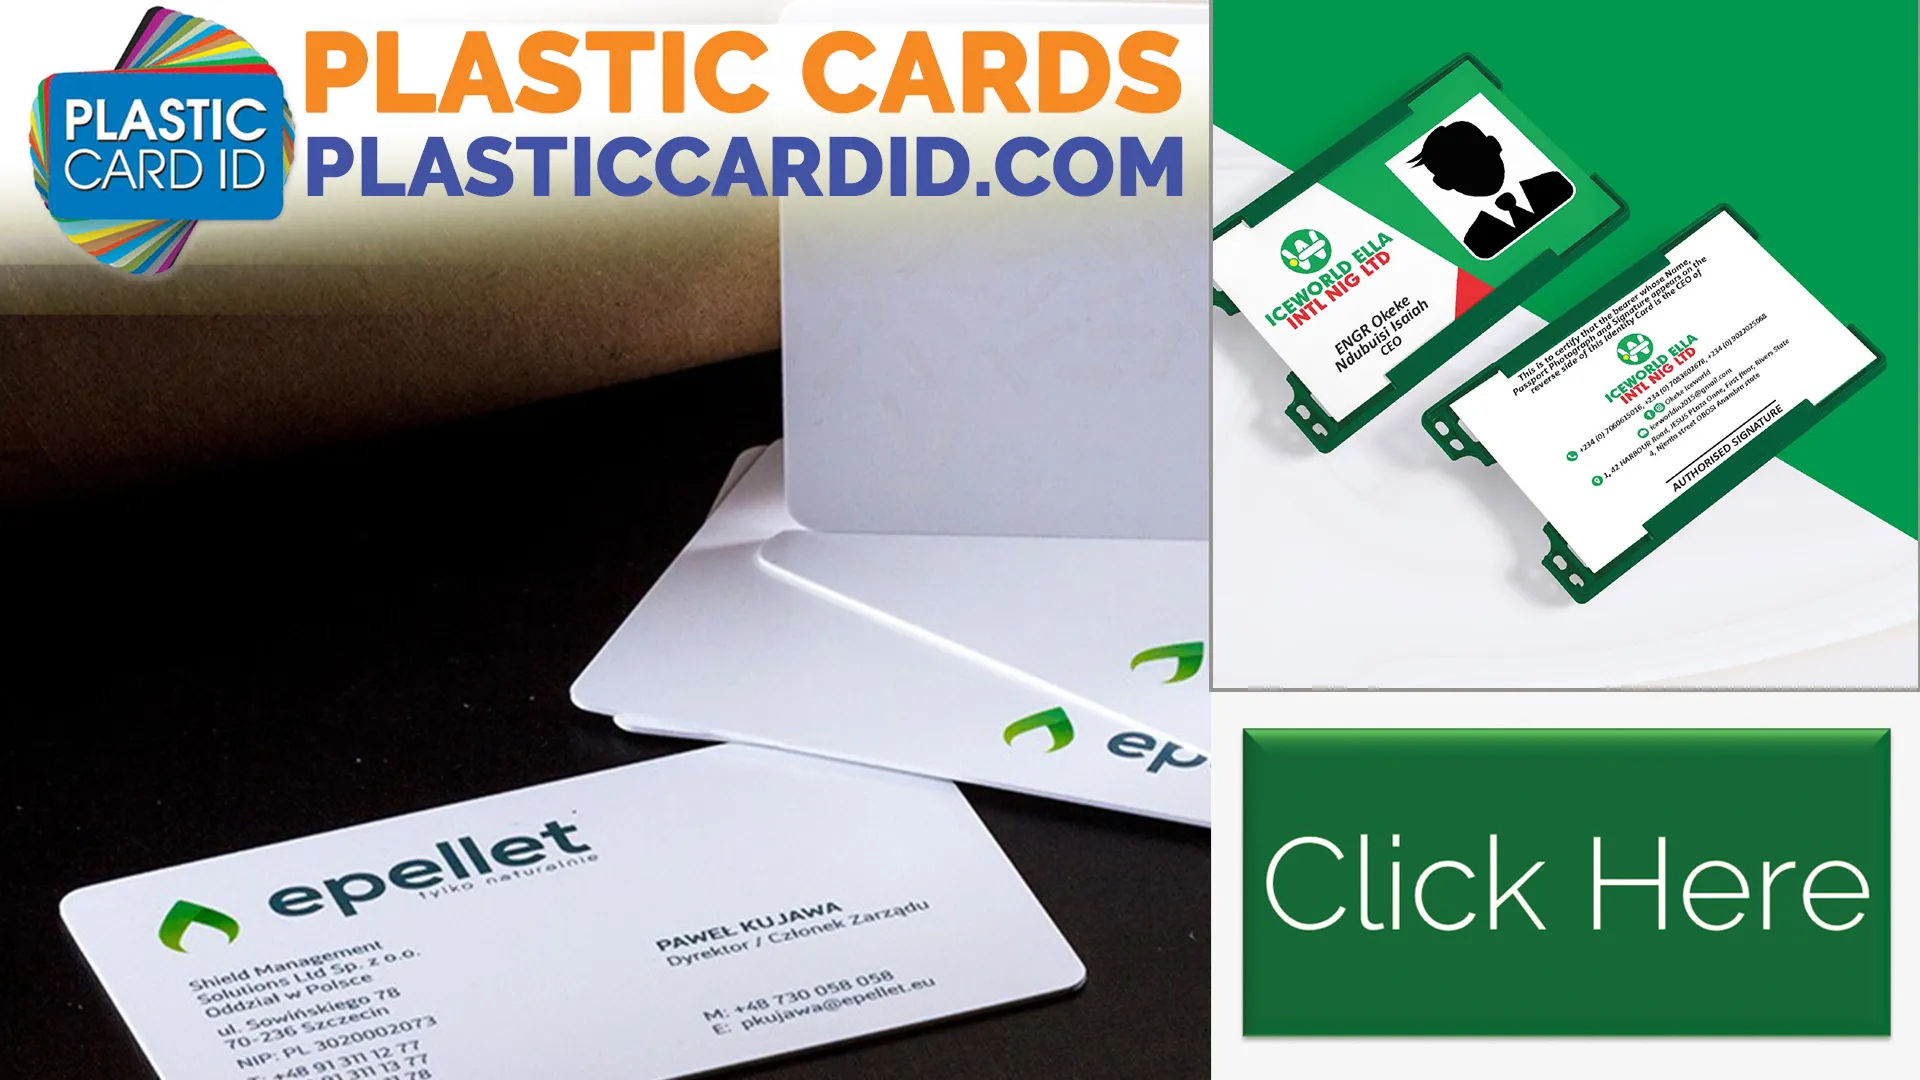 The Language of Color in Plastic Card Design